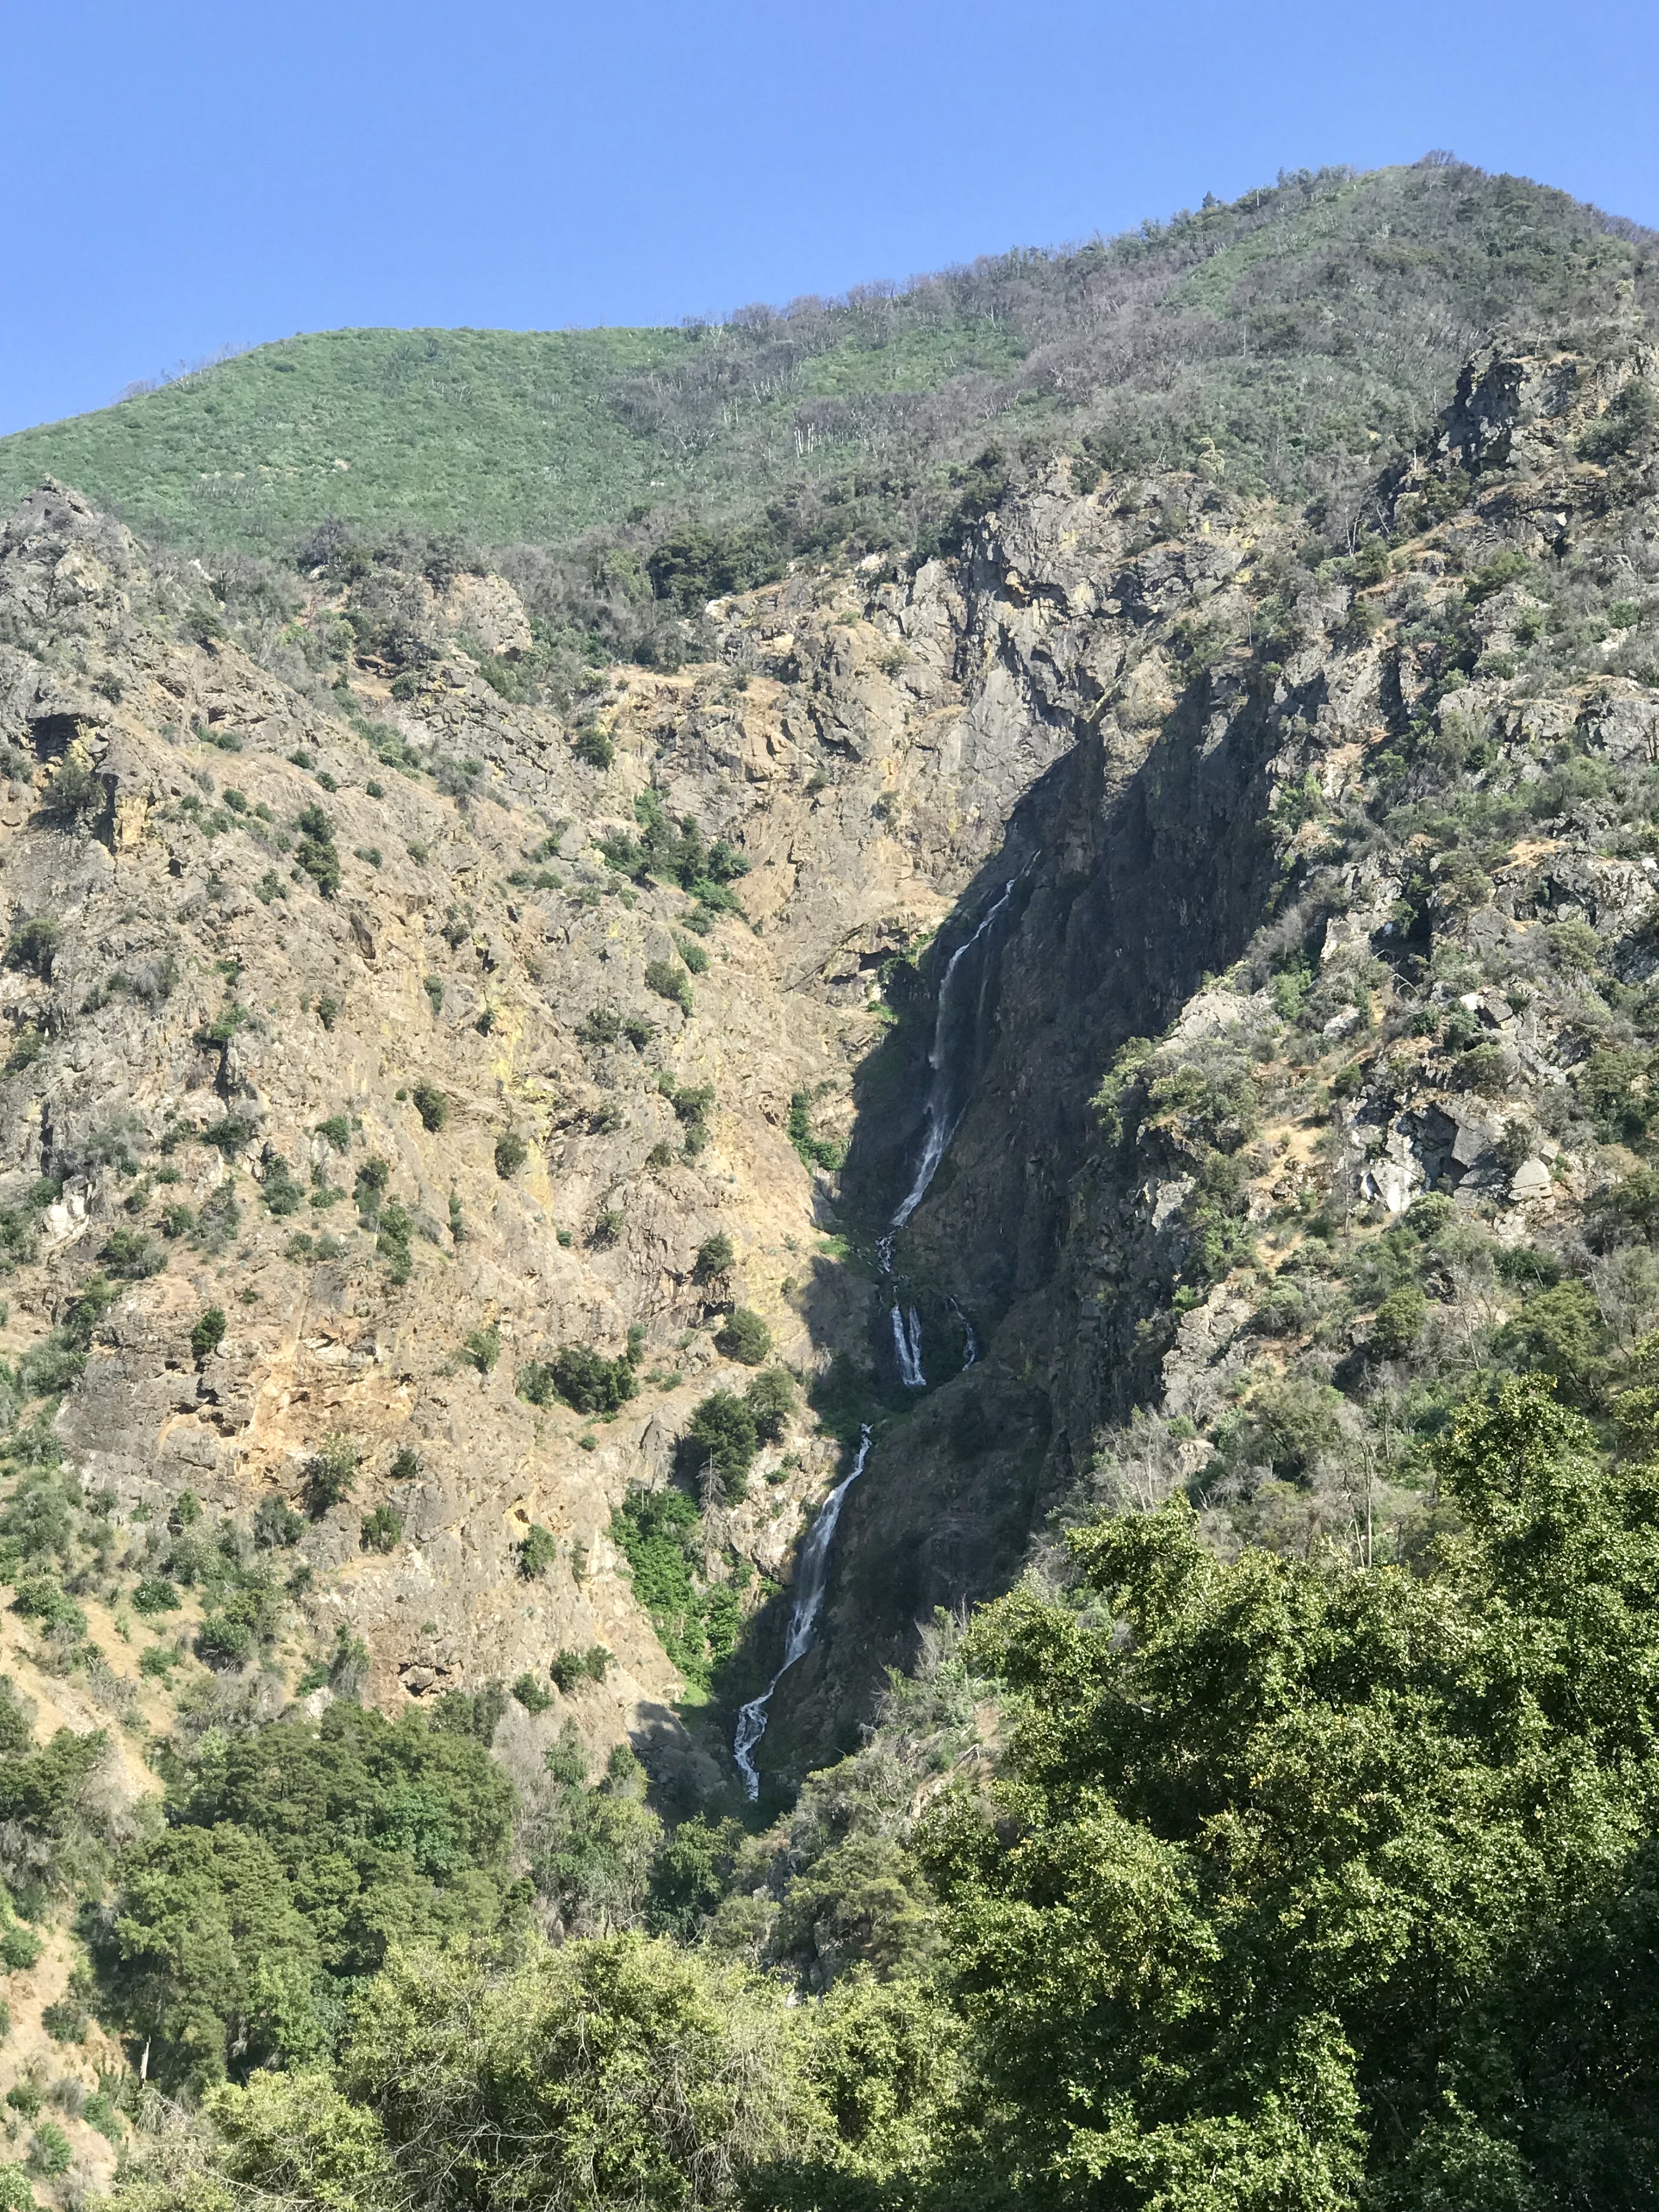 The Sequoia National Park & King's Canyon Travel Guide